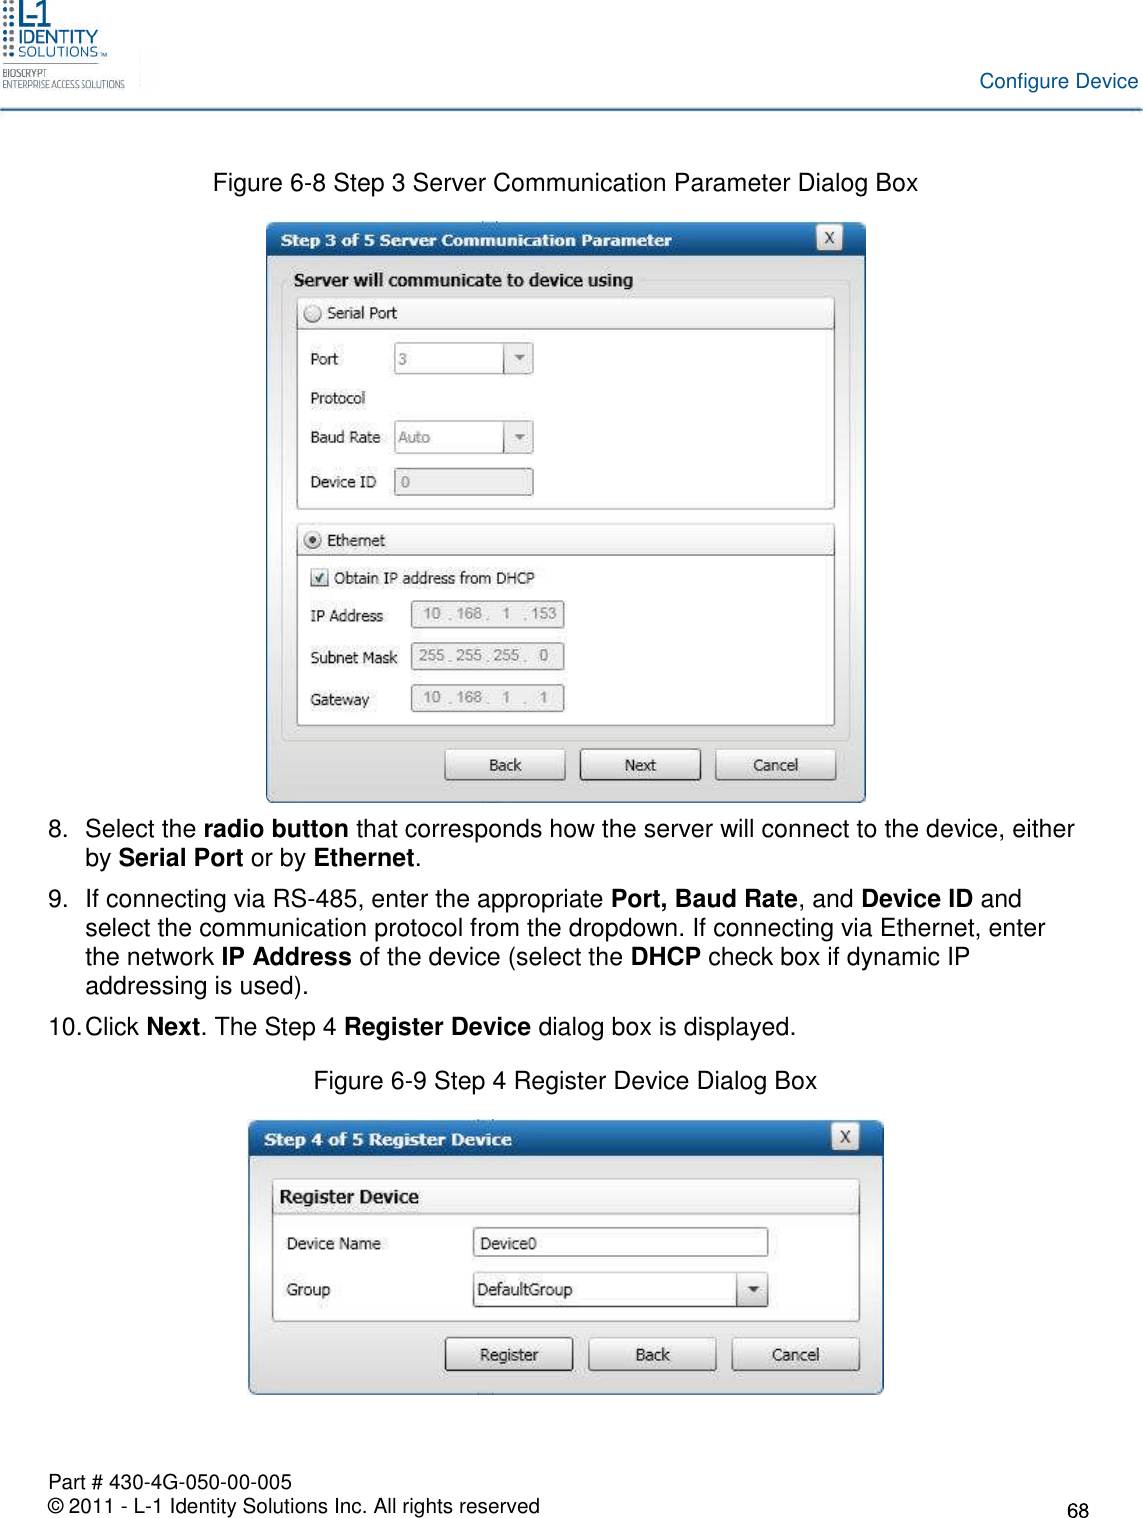 Part # 430-4G-050-00-005© 2011 - L-1 Identity Solutions Inc. All rights reservedConfigure DeviceFigure 6-8 Step 3 Server Communication Parameter Dialog Box8. Select the radio button that corresponds how the server will connect to the device, eitherby Serial Port or by Ethernet.9. If connecting via RS-485, enter the appropriate Port, Baud Rate, and Device ID andselect the communication protocol from the dropdown. If connecting via Ethernet, enterthe network IP Address of the device (select the DHCP check box if dynamic IPaddressing is used).10.Click Next. The Step 4 Register Device dialog box is displayed.Figure 6-9 Step 4 Register Device Dialog Box